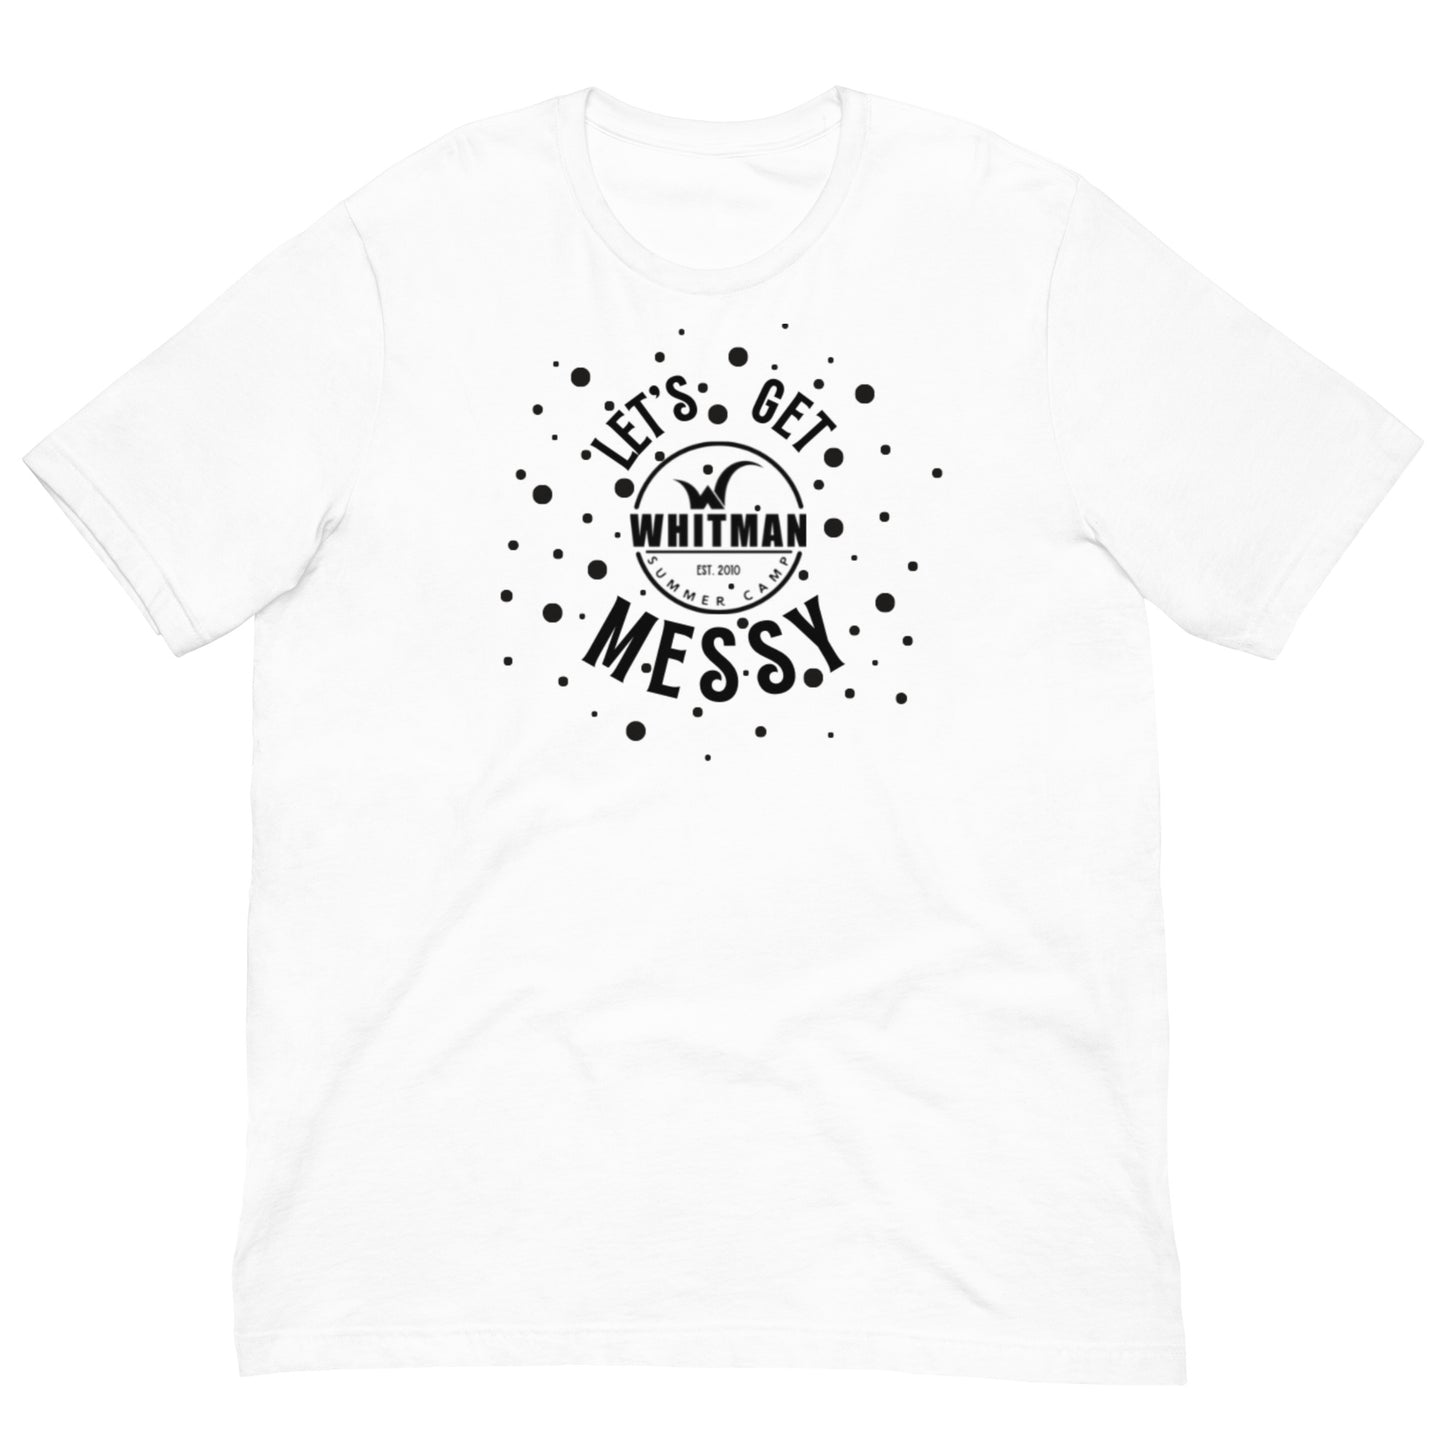 Messy Day T-shirt (Adult Sizes)